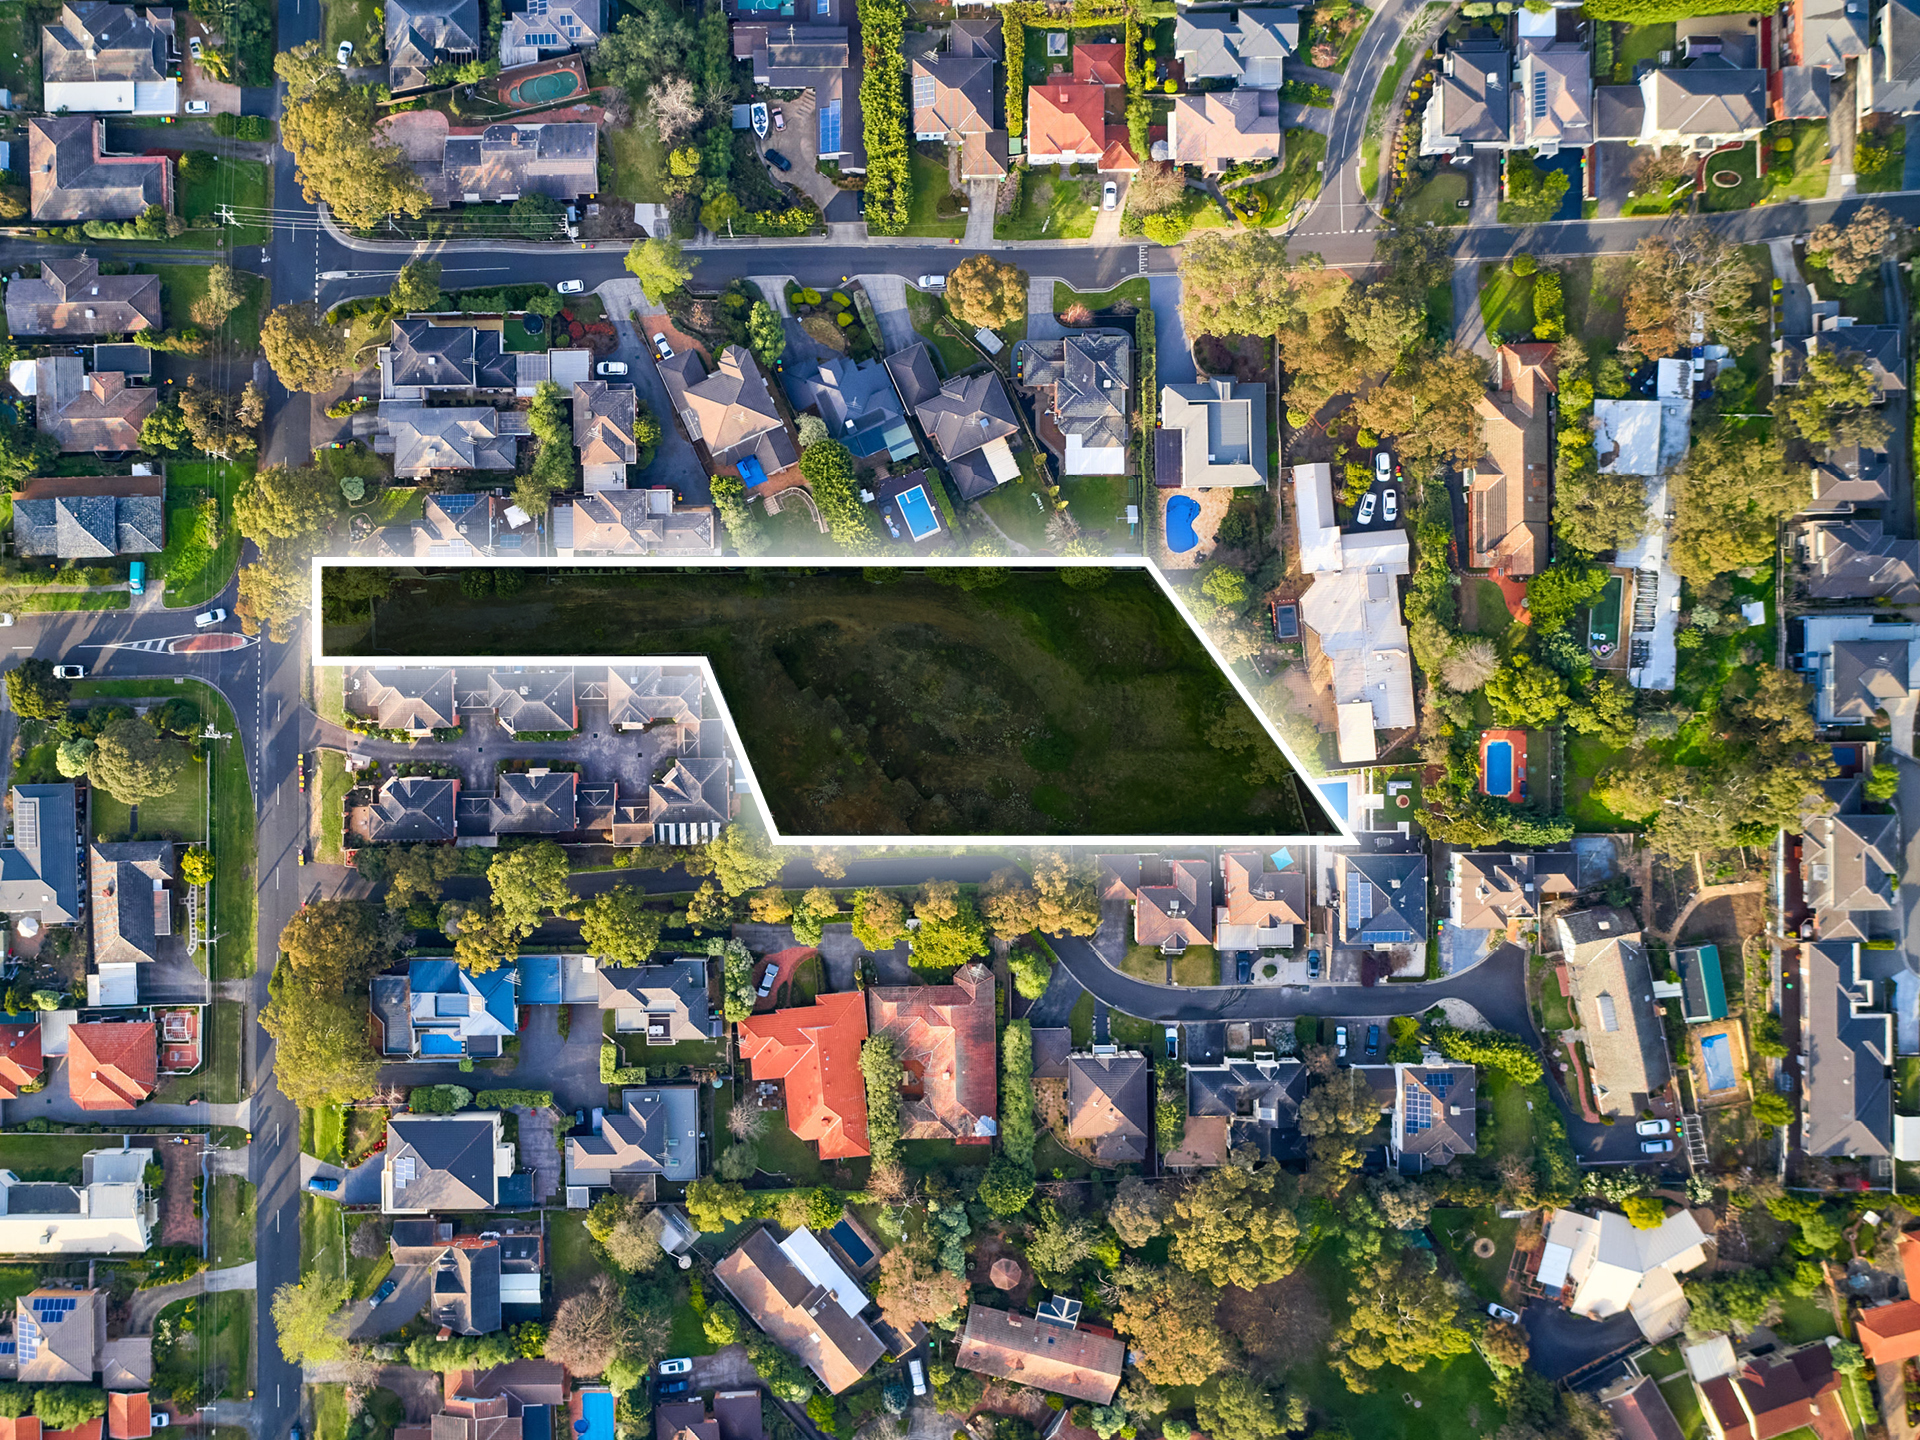 Vendor Banks $1.4m In Under A Year As Stonebridge Slots 6th Eastern Melbourne Townhouse Site Sale In Under 1.5 Months